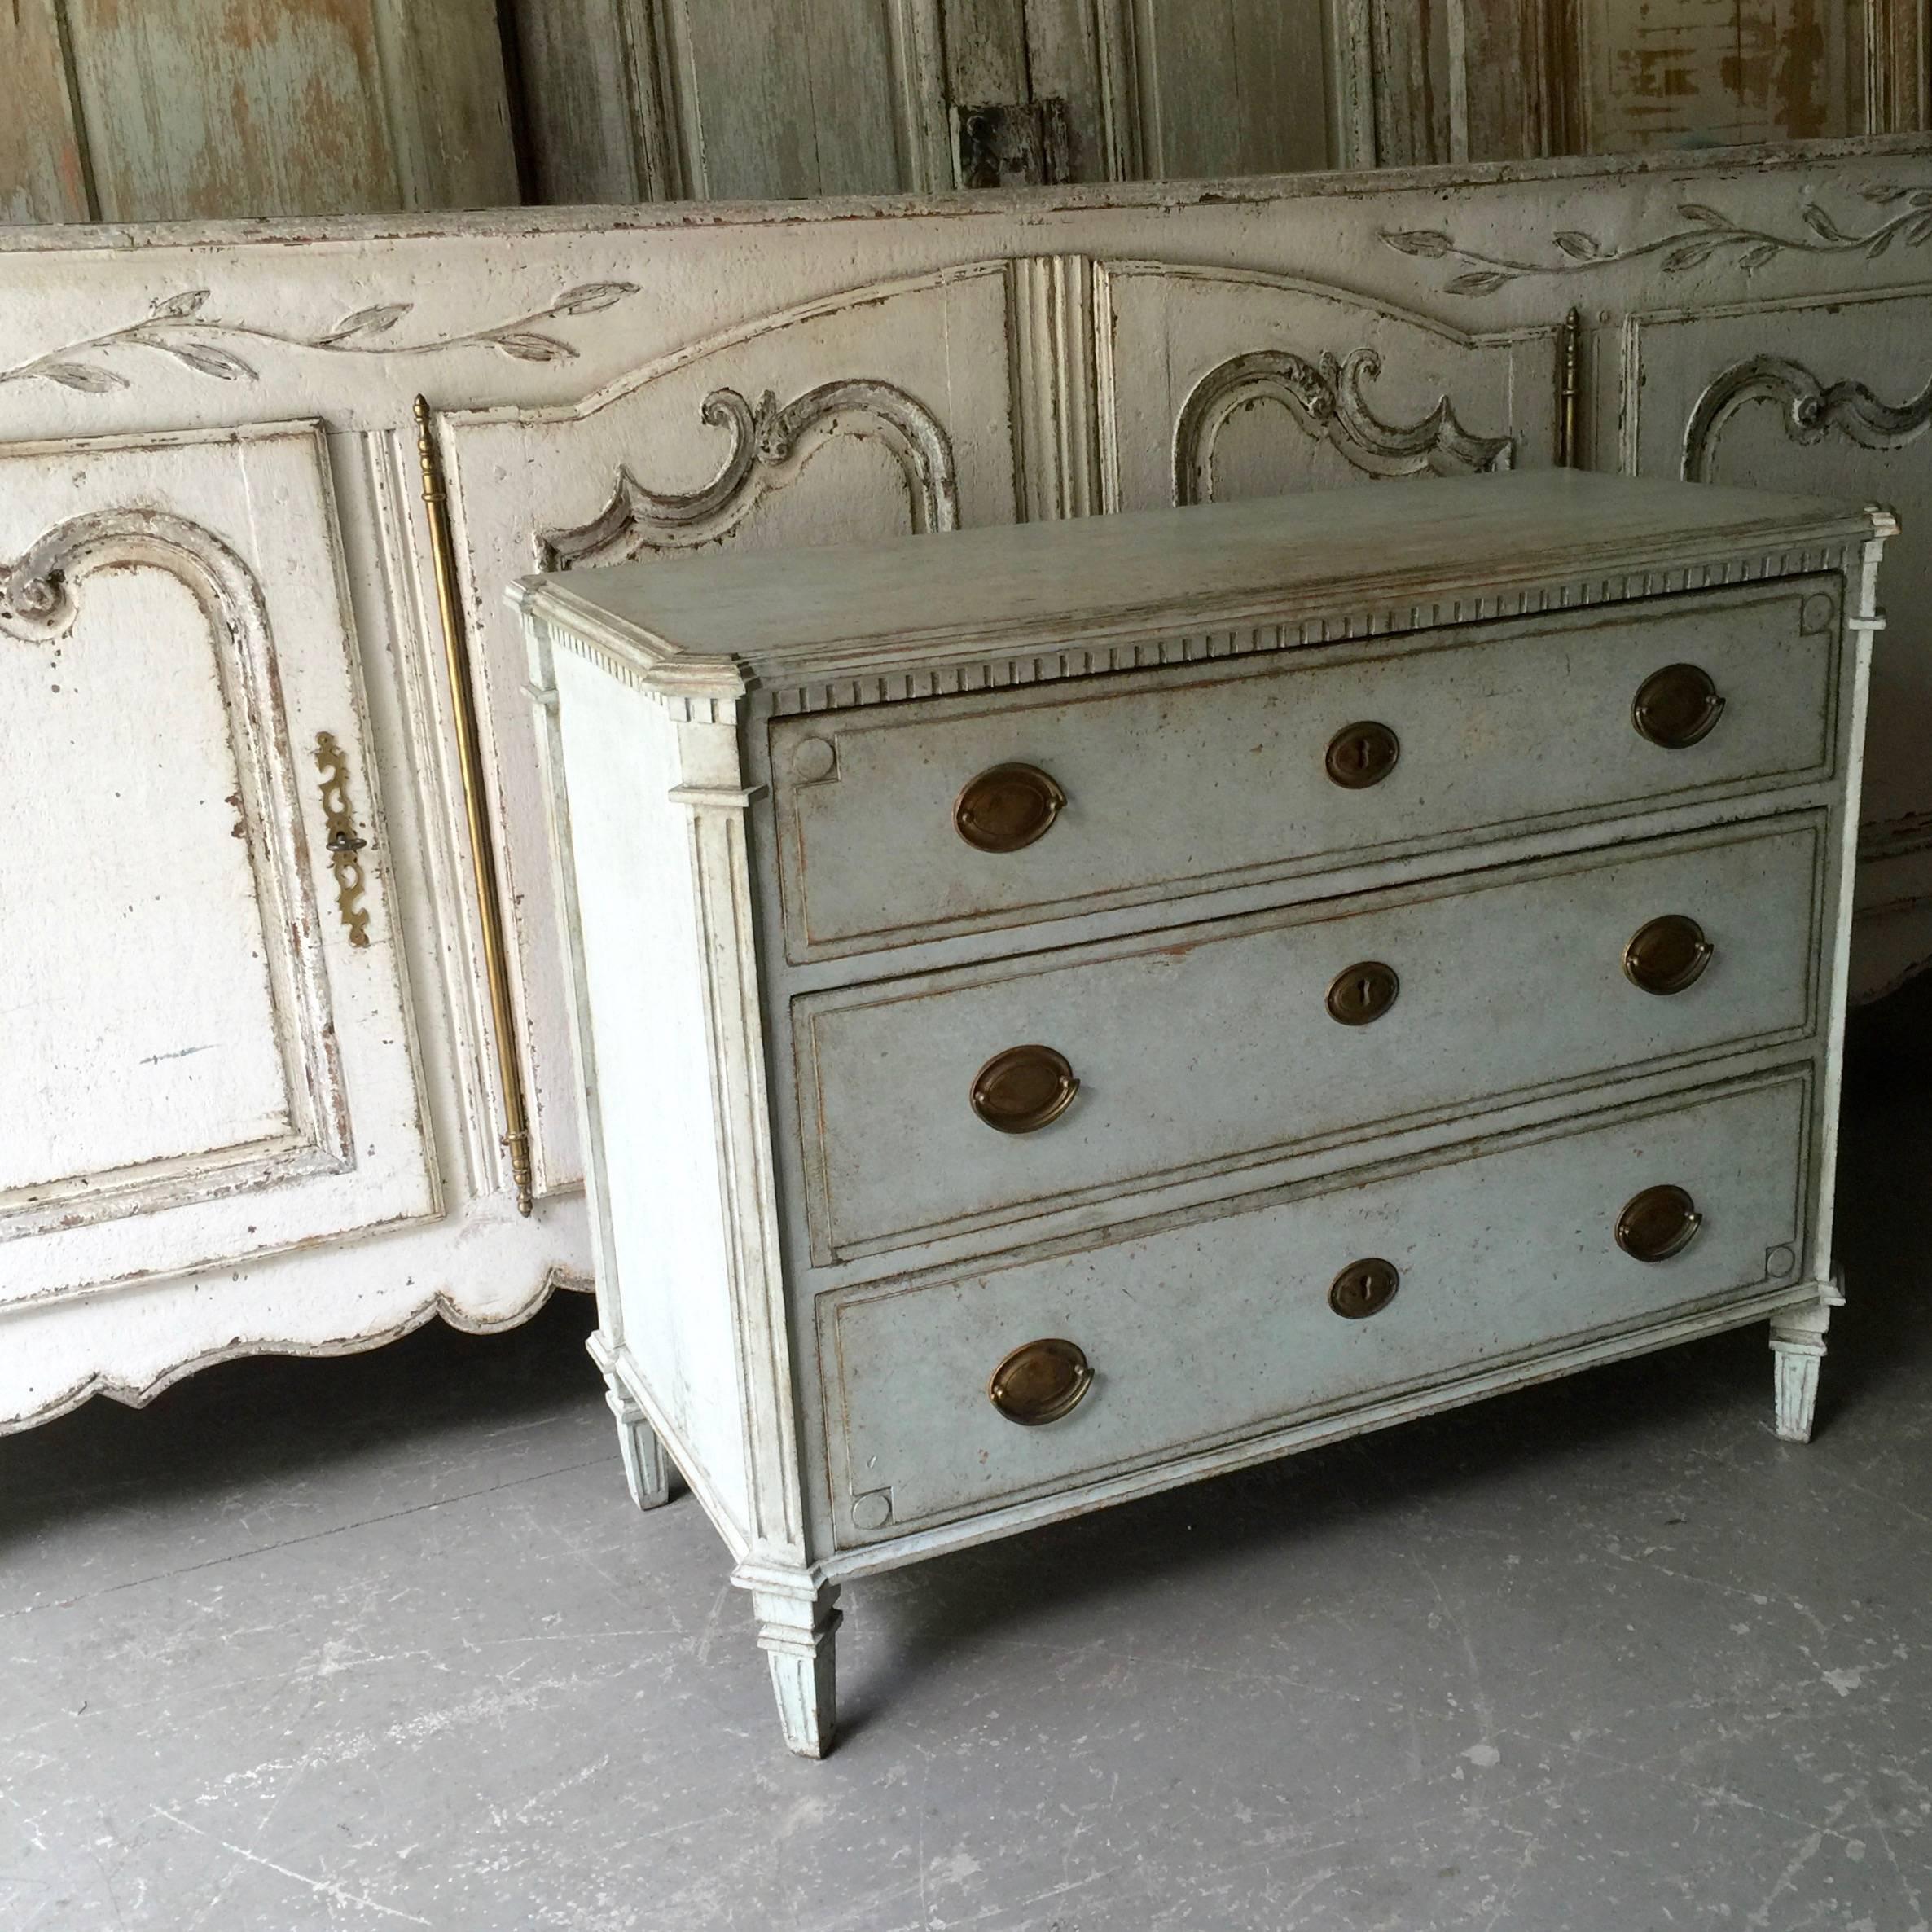 Swedish period Gustavian chest of drawers in charming pale blue color with three drawers, canted and reeded corners, handsome bronze hardwares and tapering square legs under the shaped top.
Sweden, circa 1810.
More than ever, we selected the best,